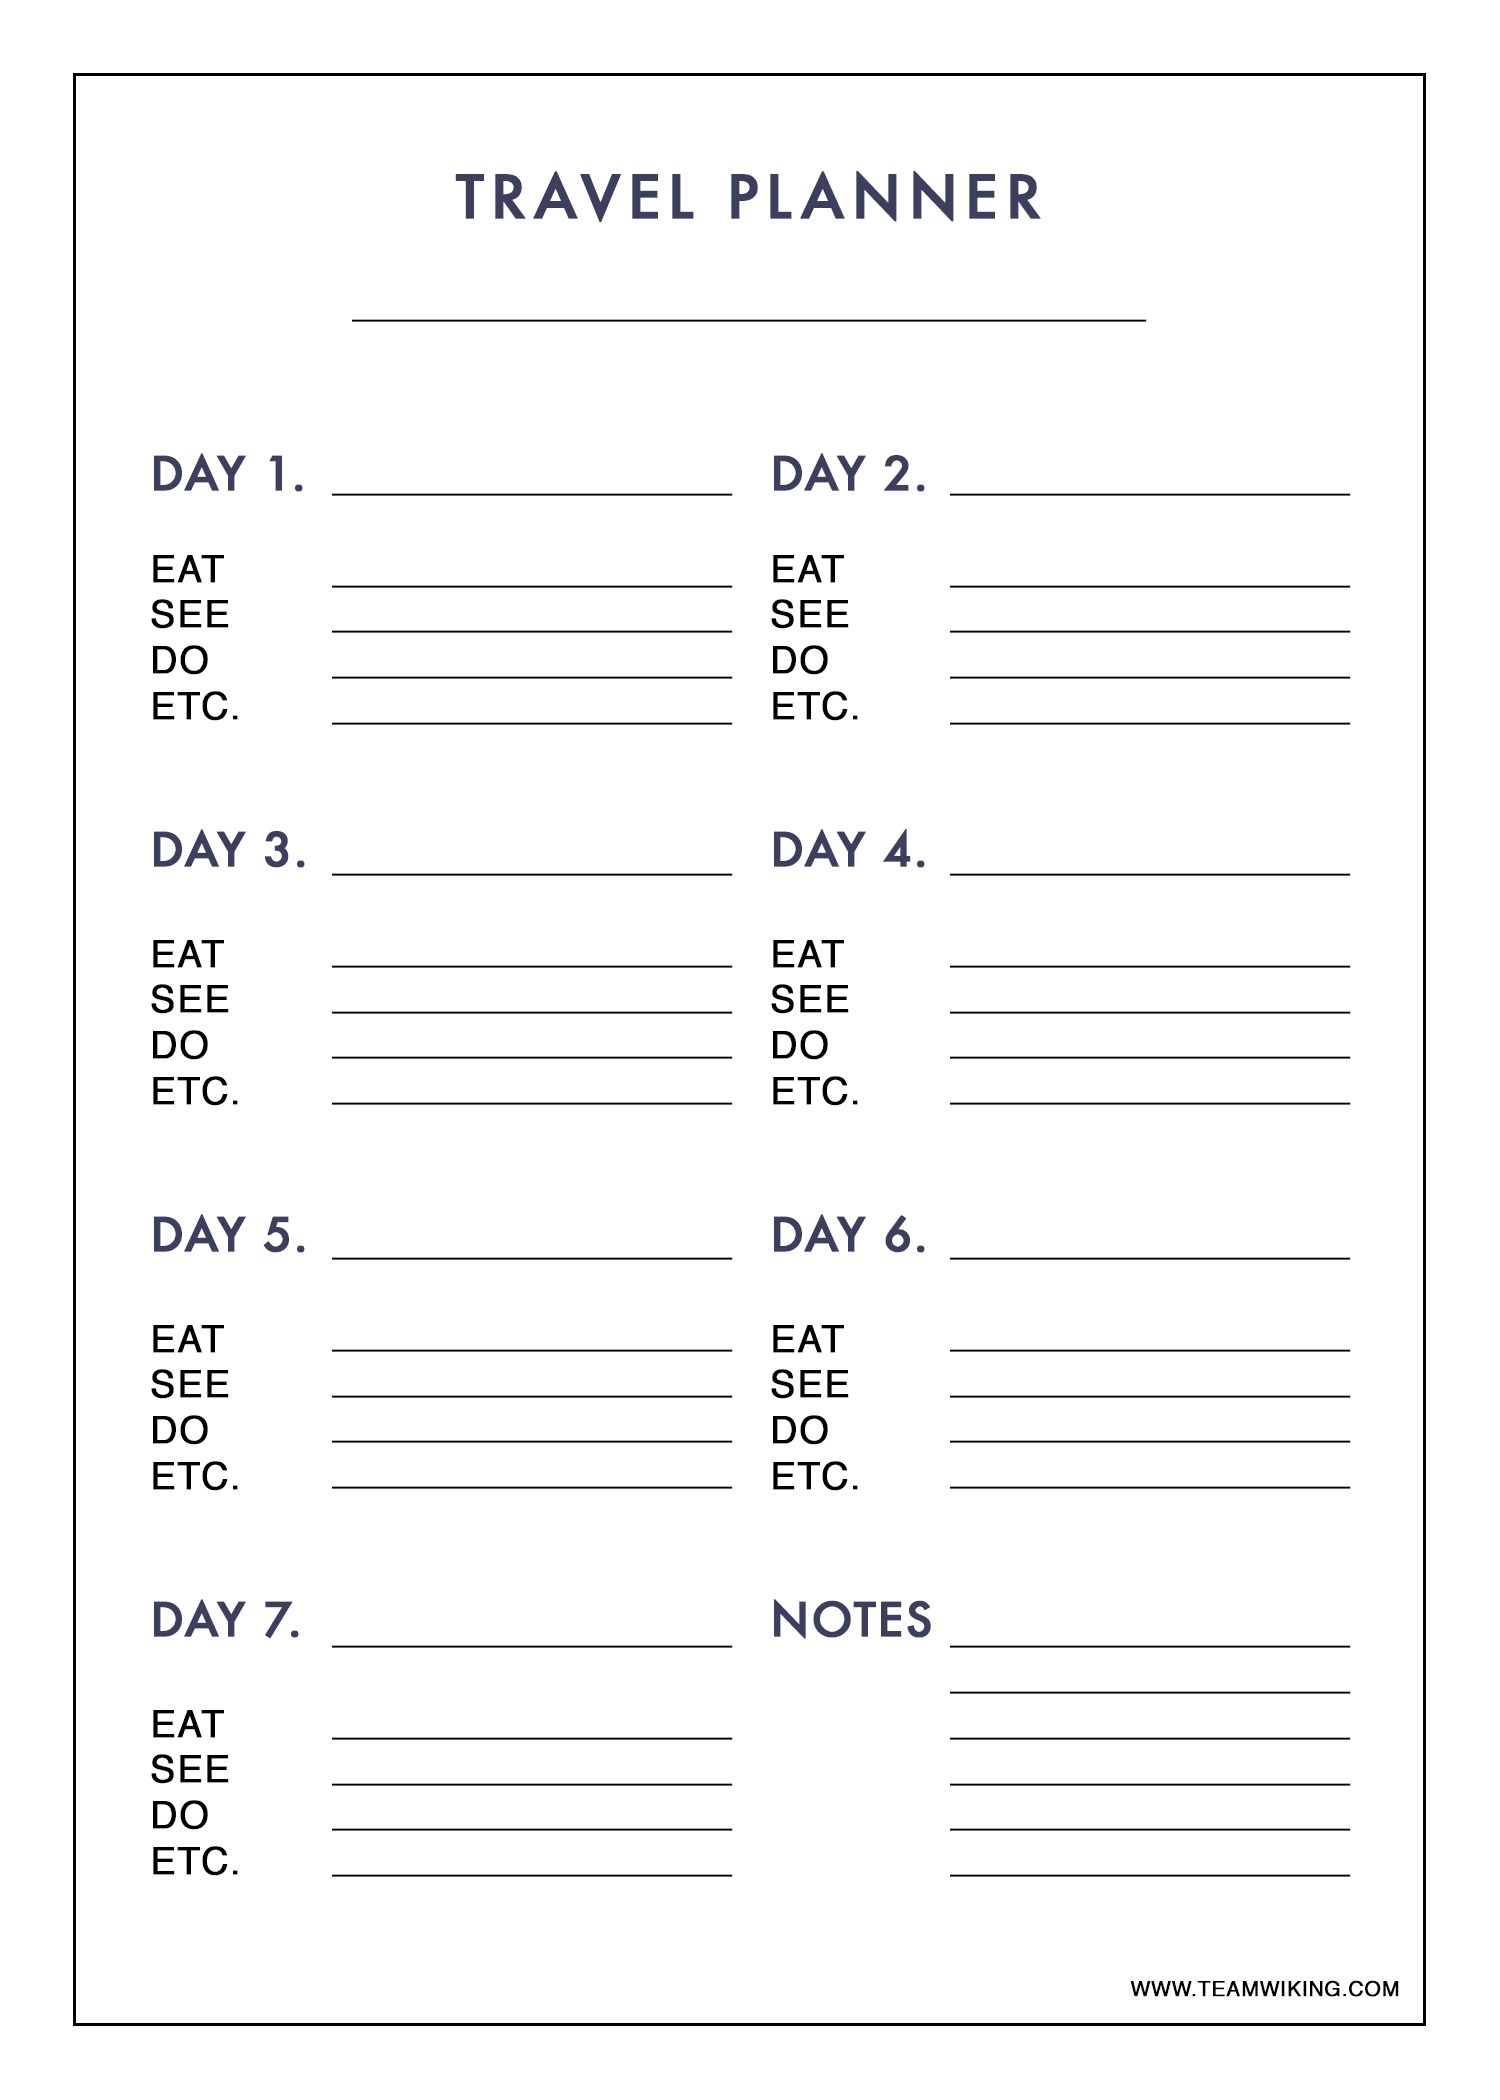 Free Printable 7 Day Travel Planner (Use To Plan Outfits - Packing - Free Printable Road Trip Planner